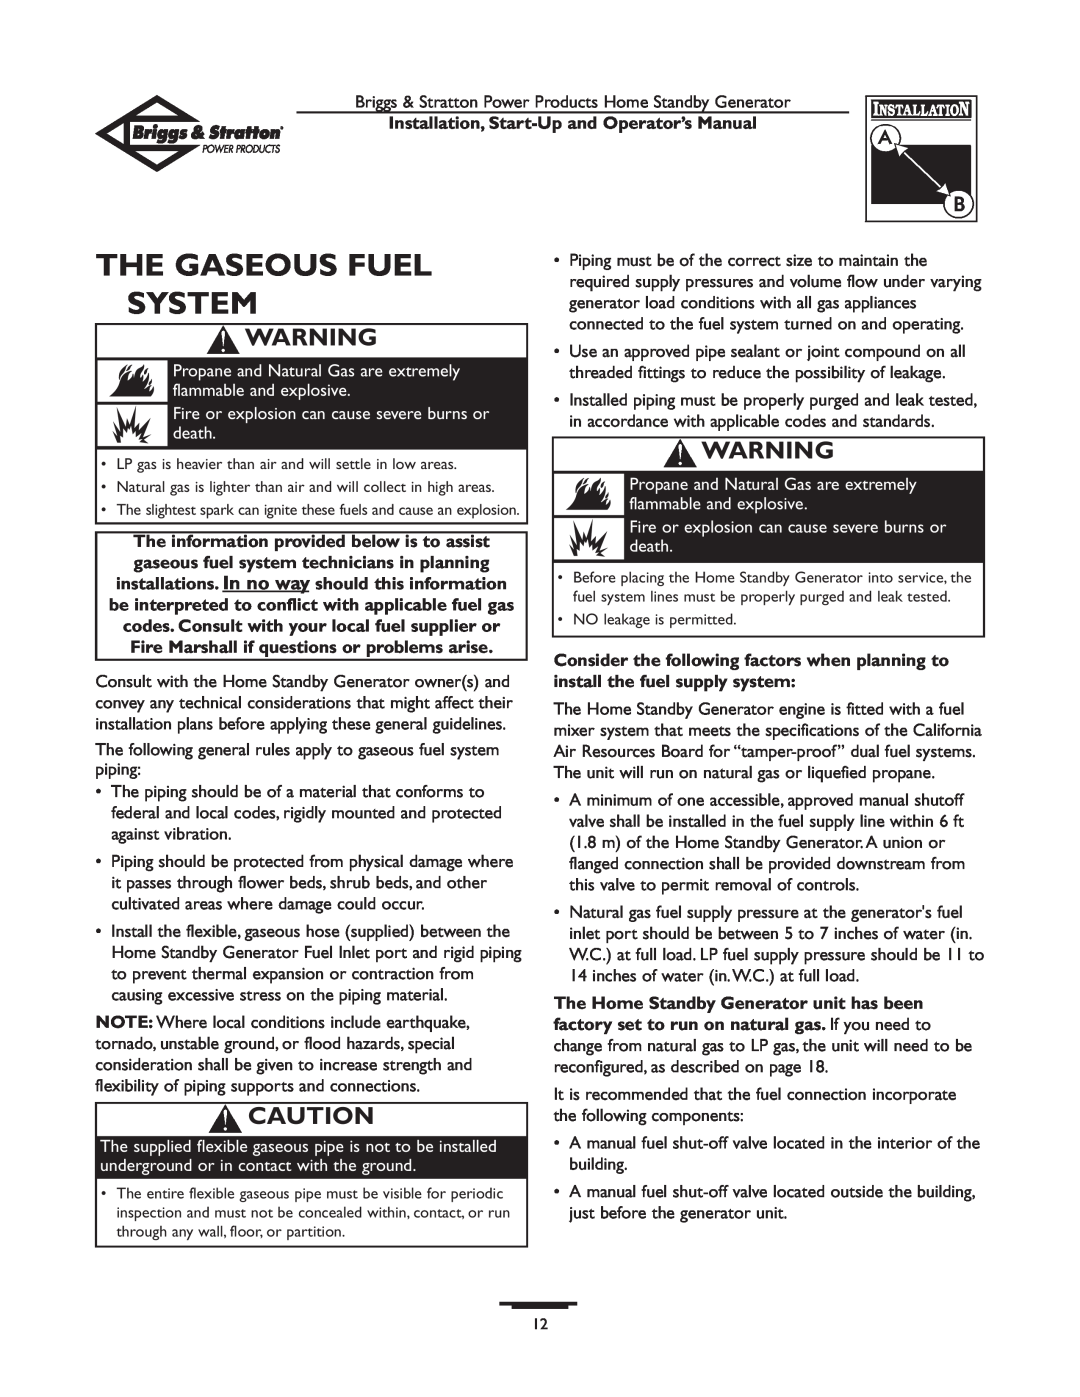 Briggs & Stratton 01897-0 manual The Gaseous Fuel System, Consider the following factors when planning to 